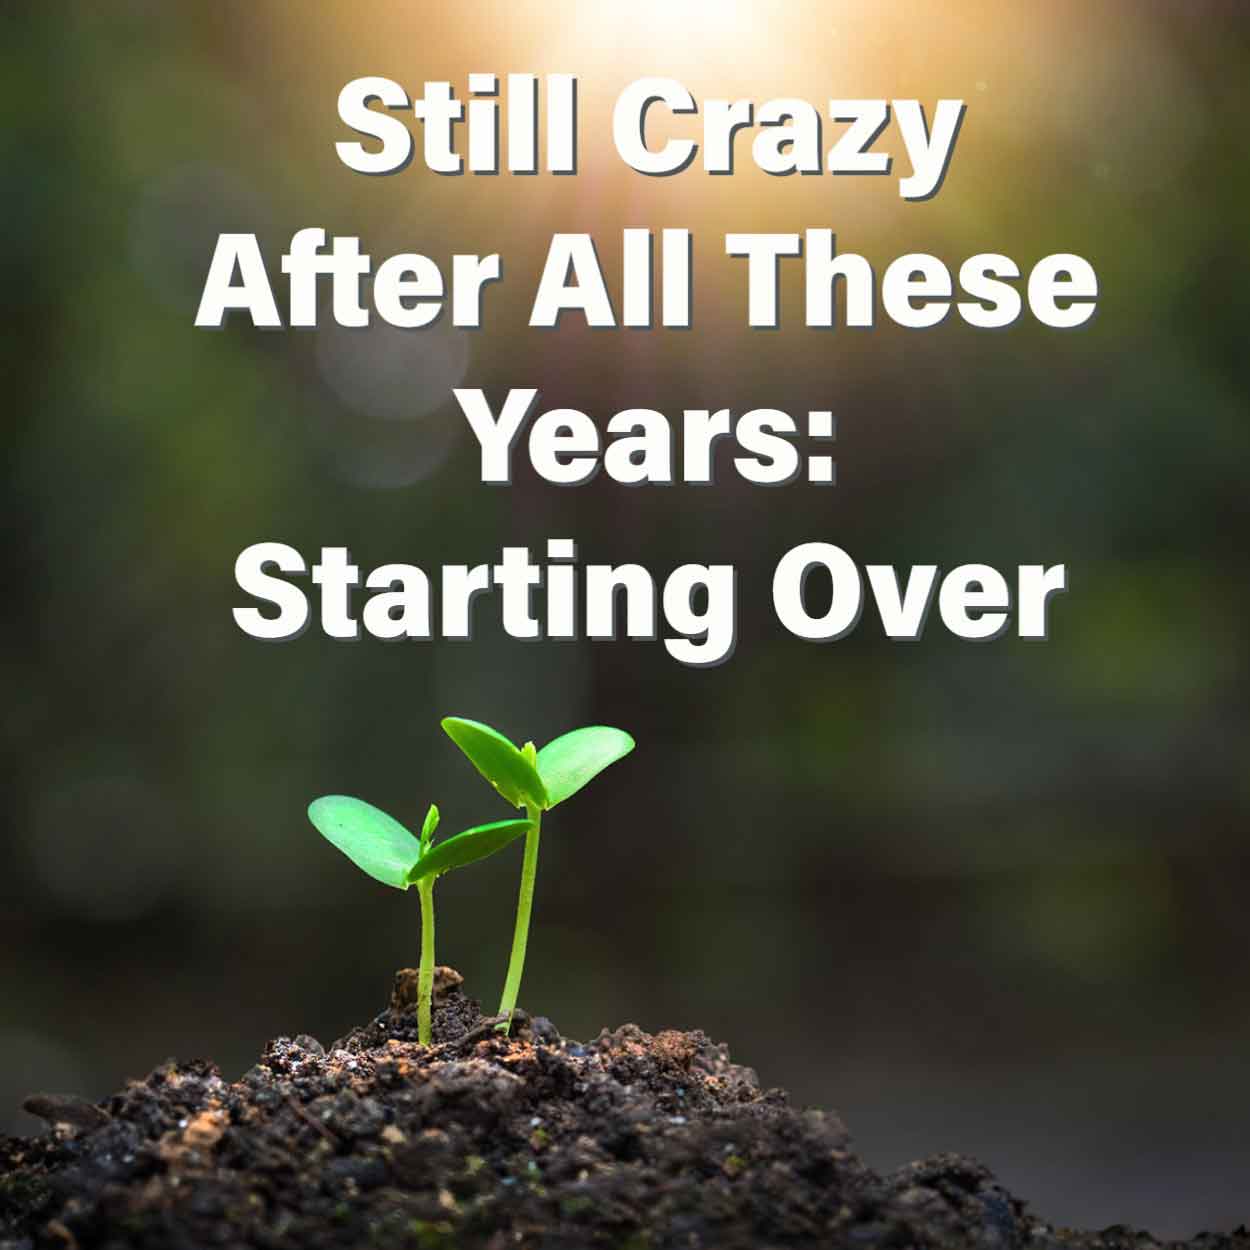 Still Crazy After All These Years: Starting Over”